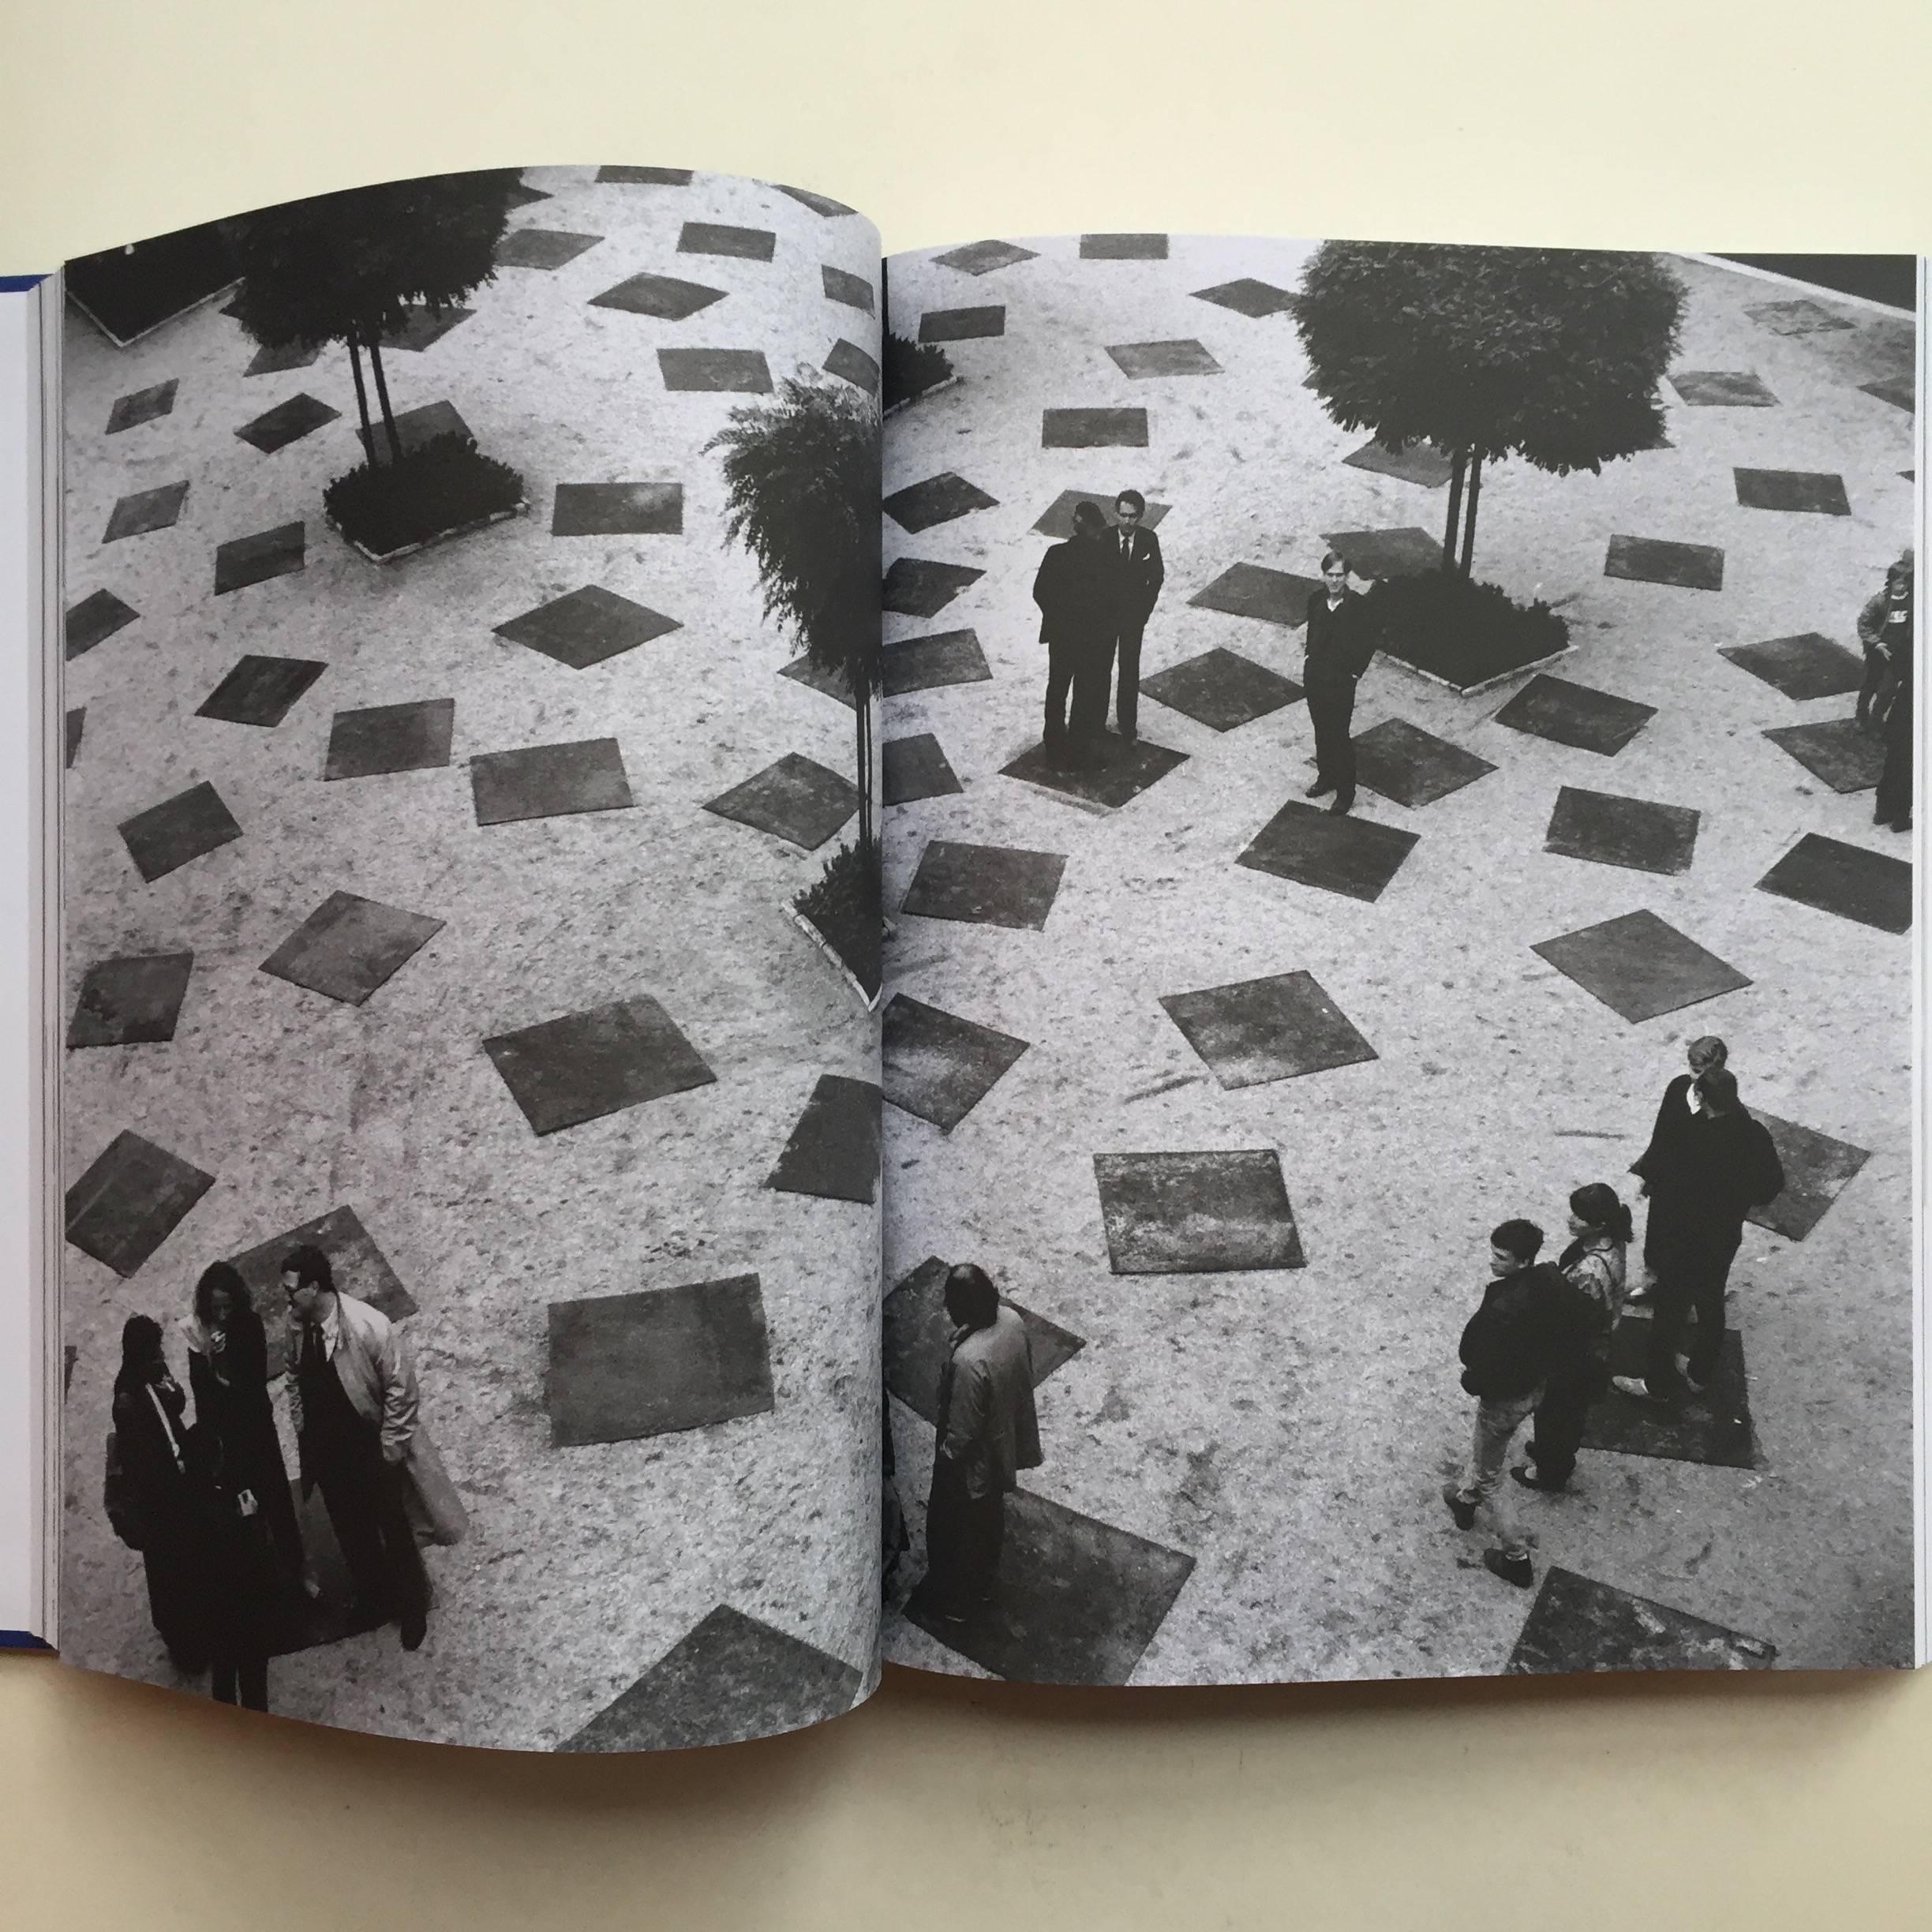 First edition, published by Yale University Press, 2014

A brilliant documentation of the career of Minimalist sculptor Carl Andre, tracing the evolution of over 50 years of his work. This book effectively covers the full spectrum and consistency